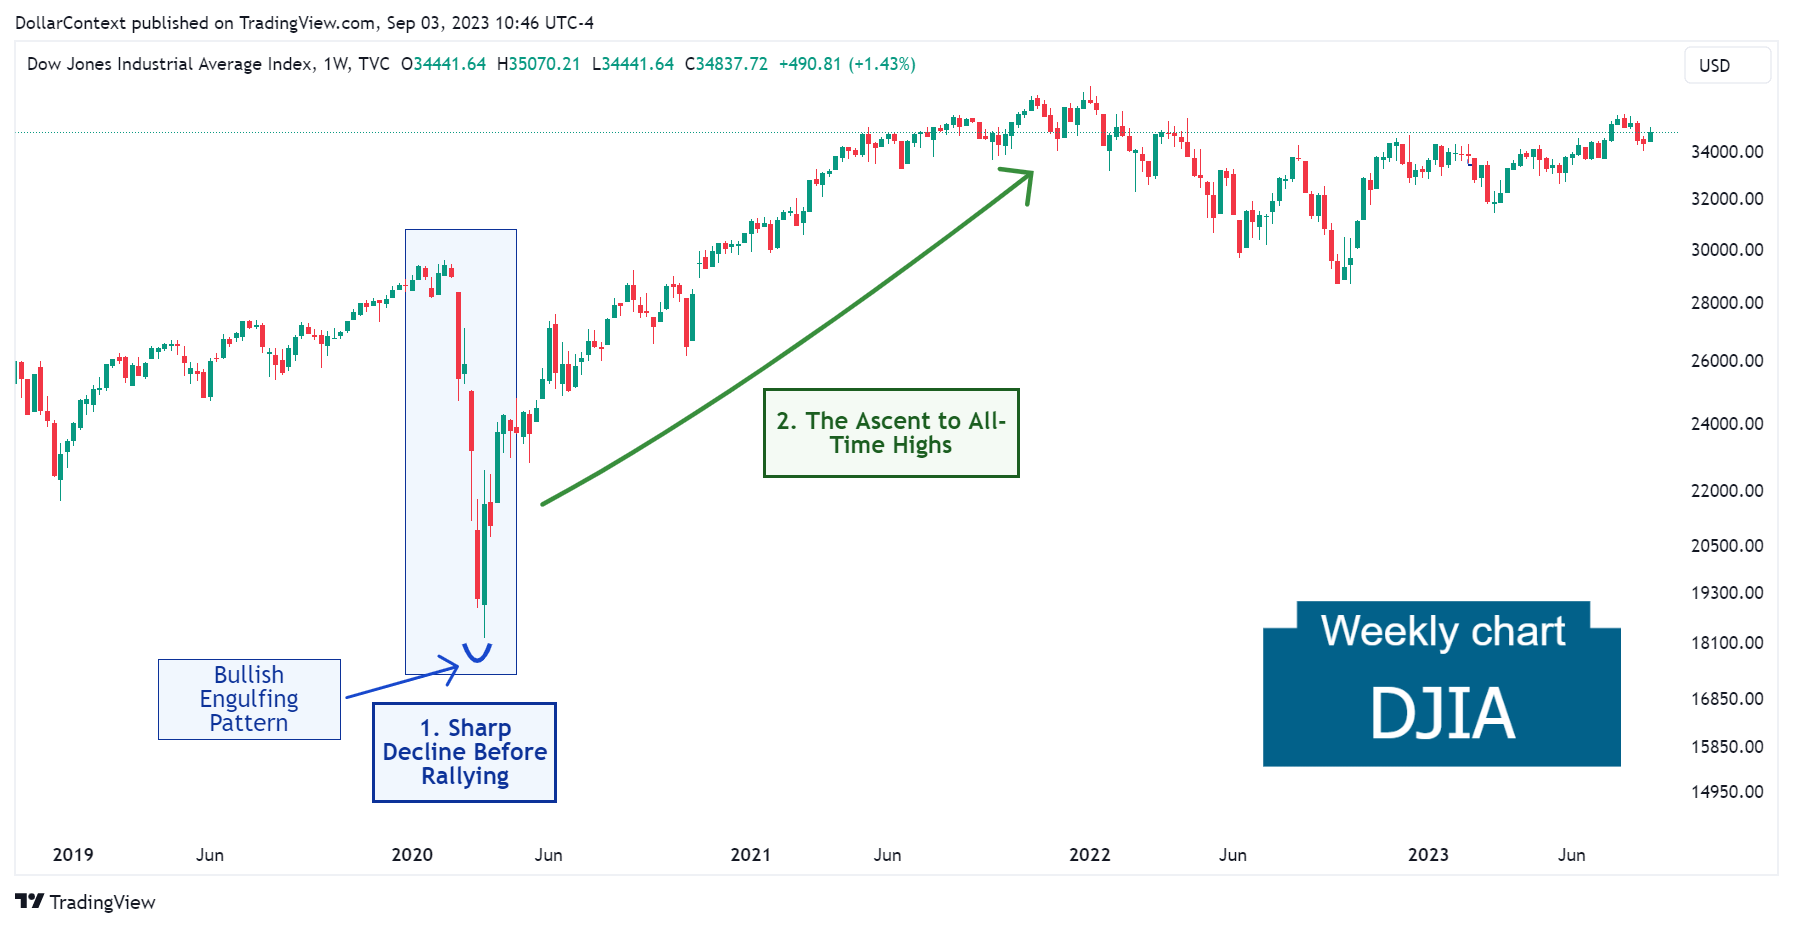 DJIA: The Sustained Rise from Mid-2020 to January 2022 (Weekly Chart)